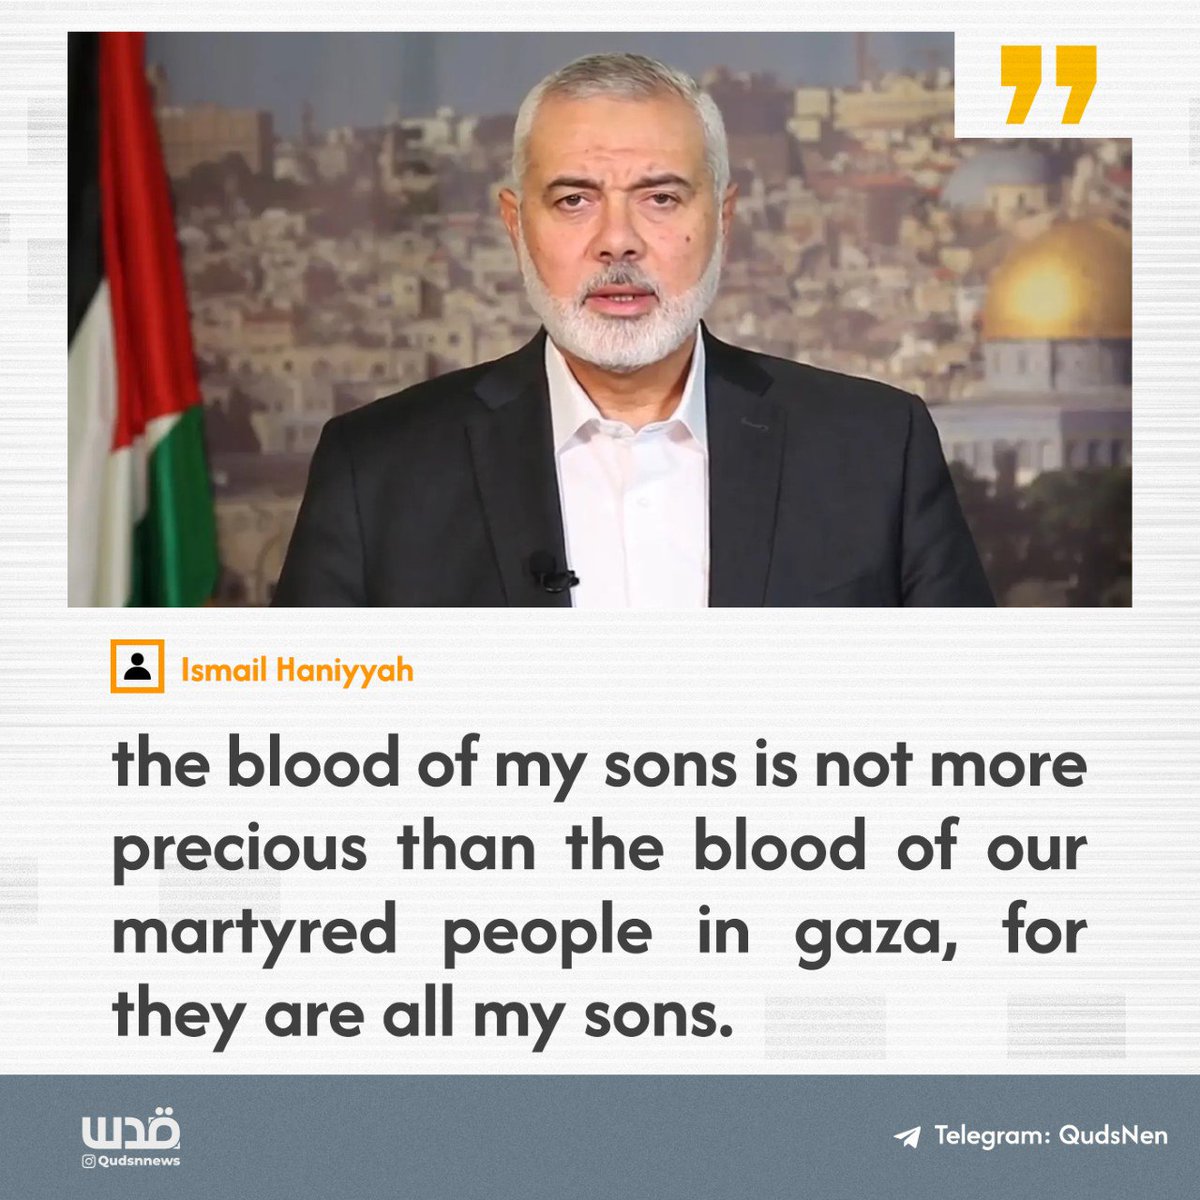 In an interview with Al Jazeera, the head of Hamas' political bureau said that the blood of his sons is not more precious than the blood of Palestinians, murdered by Israel.